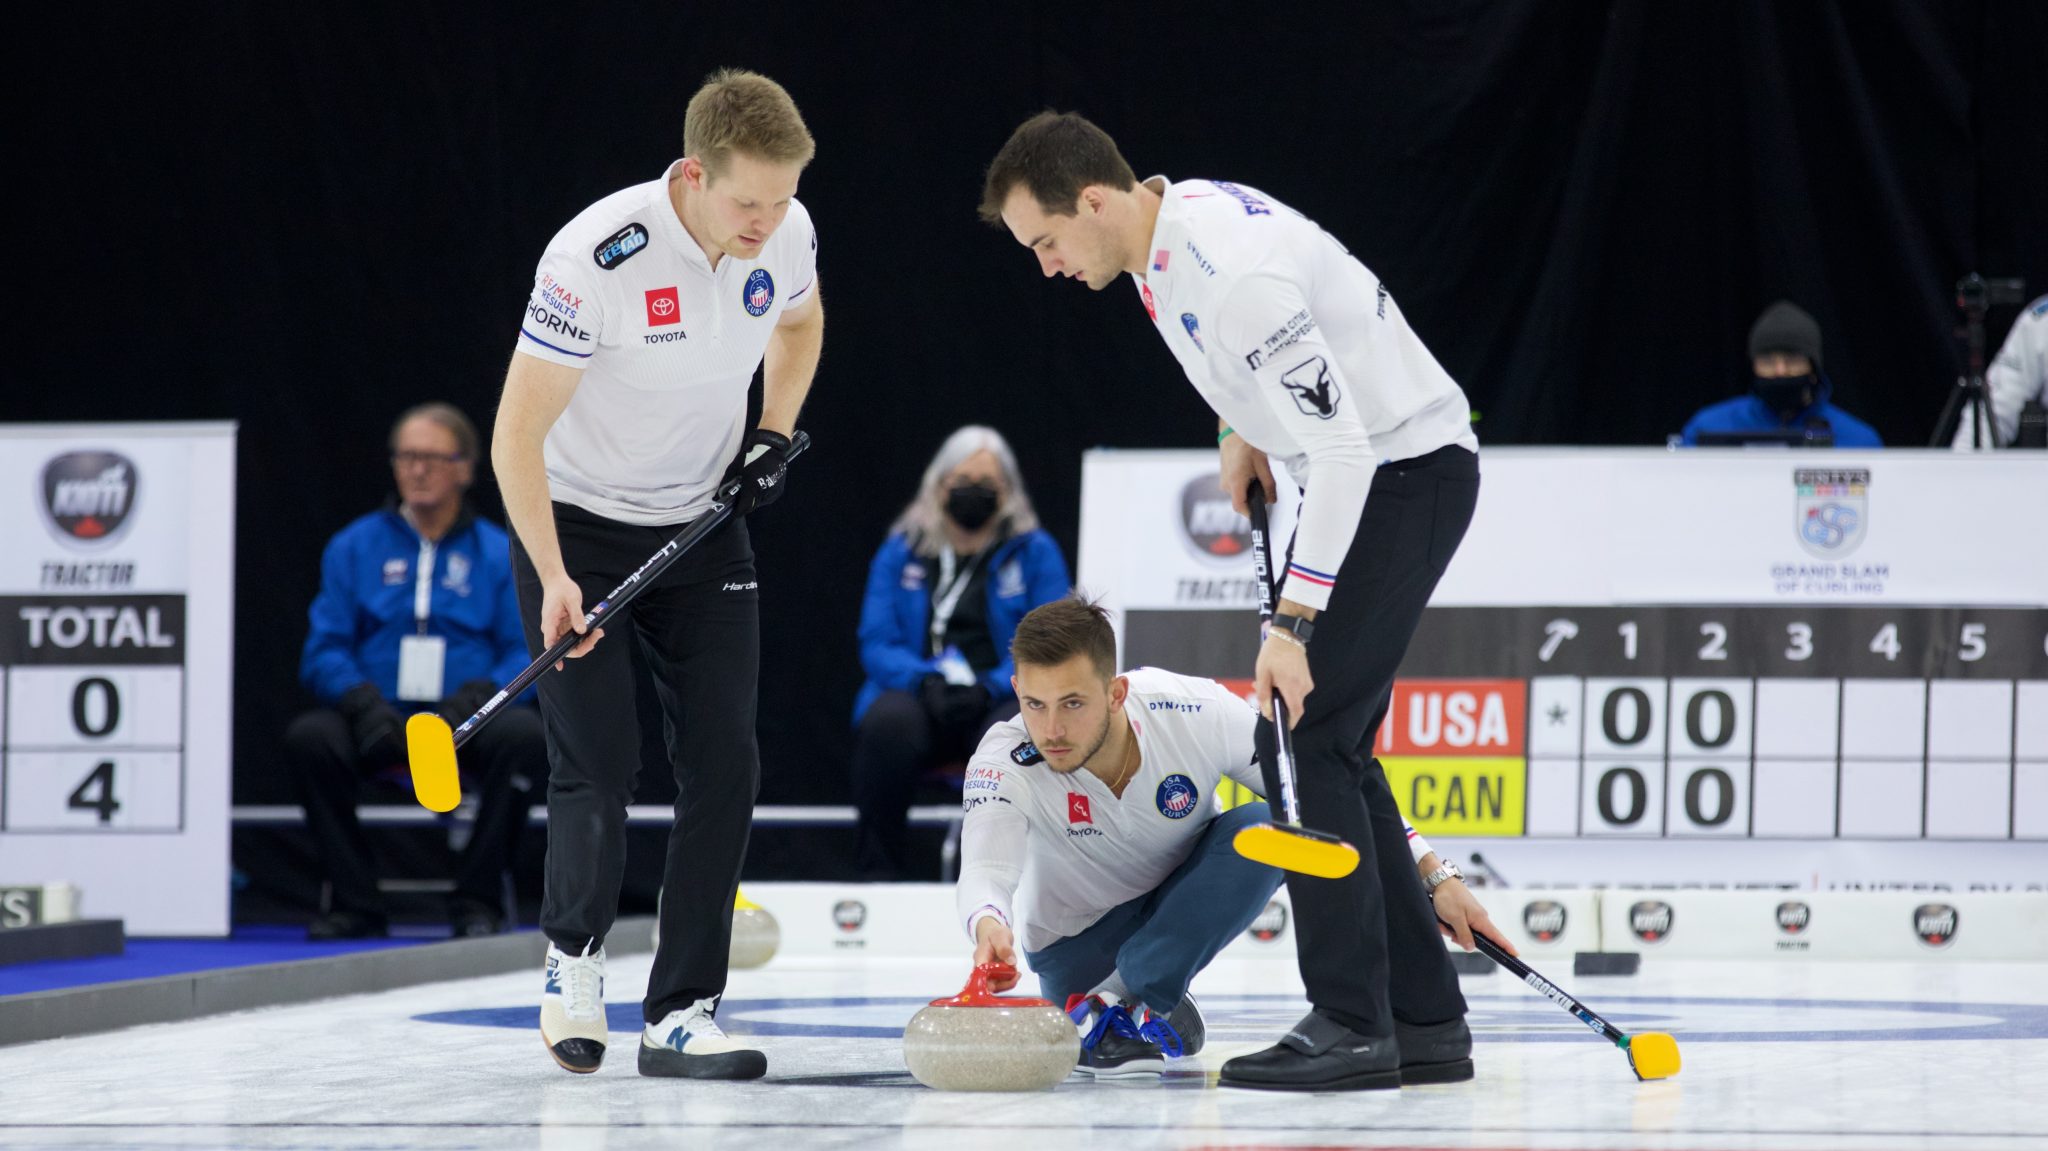 2022 HearingLife Tour Challenge Teams Announced The Grand Slam of Curling